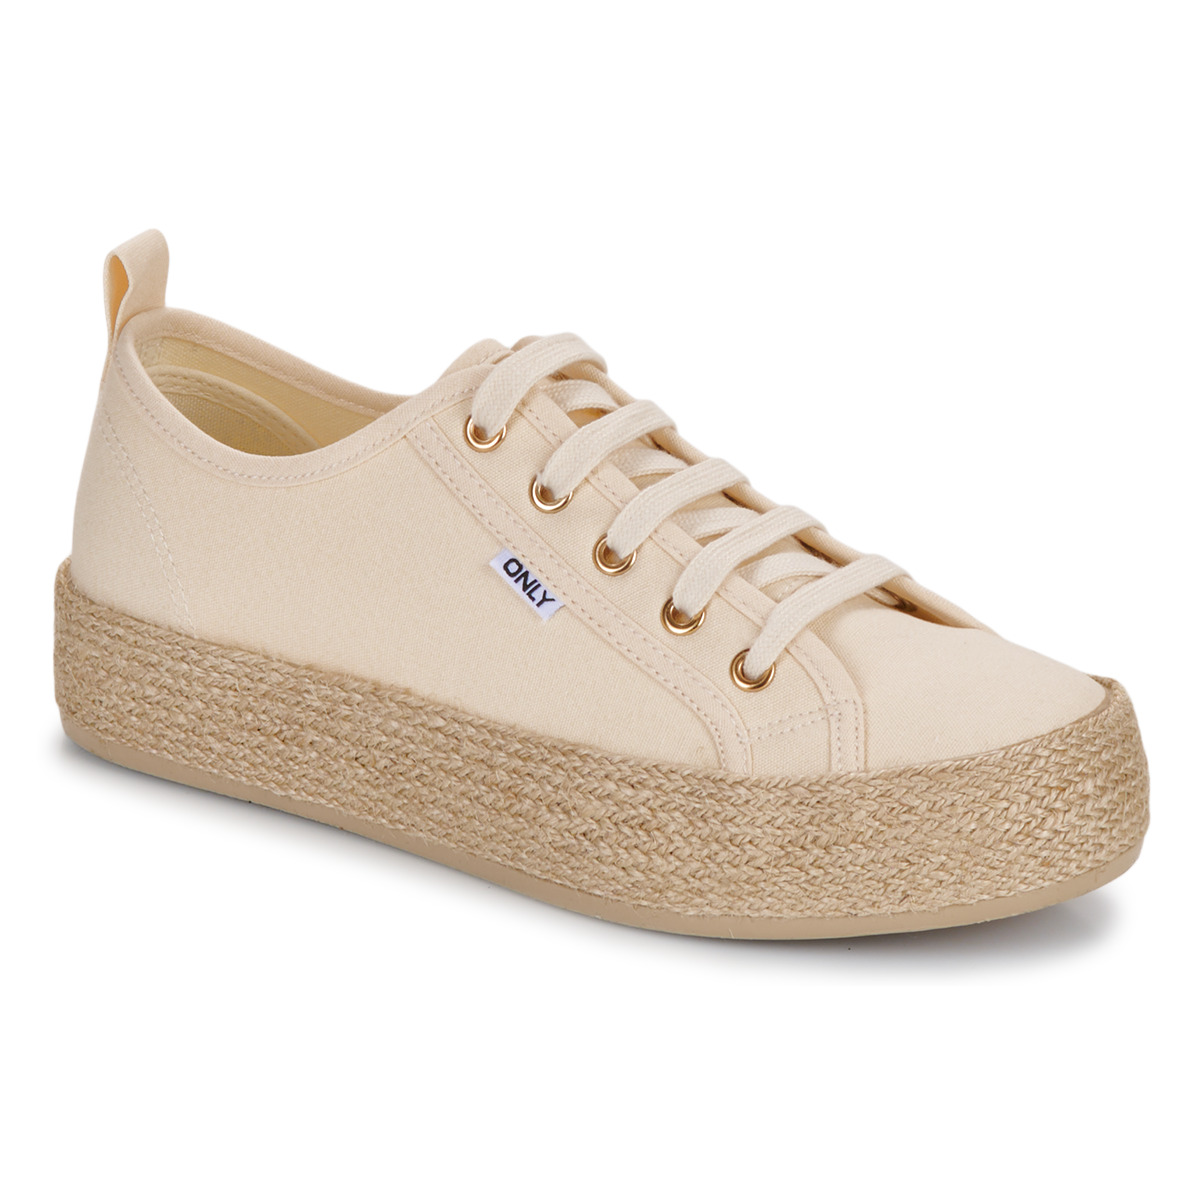 Zapatos Mujer Zapatillas bajas Only ONLIDA-1 LACE UP ESPADRILLE SNEAKER Beige